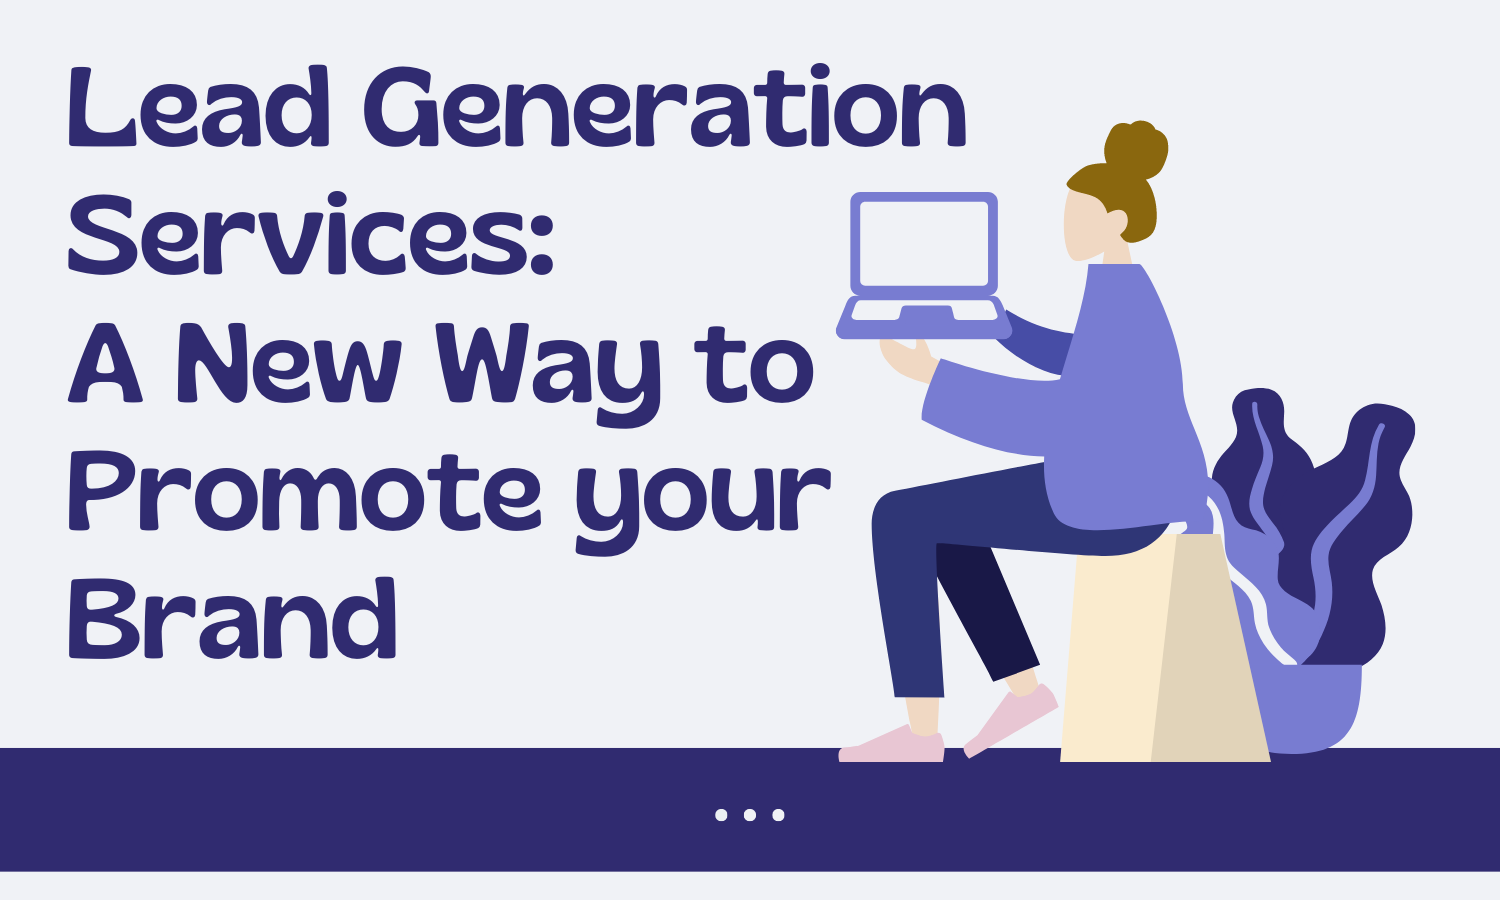 Lead Generation Services: A New Way to Promote your Brand